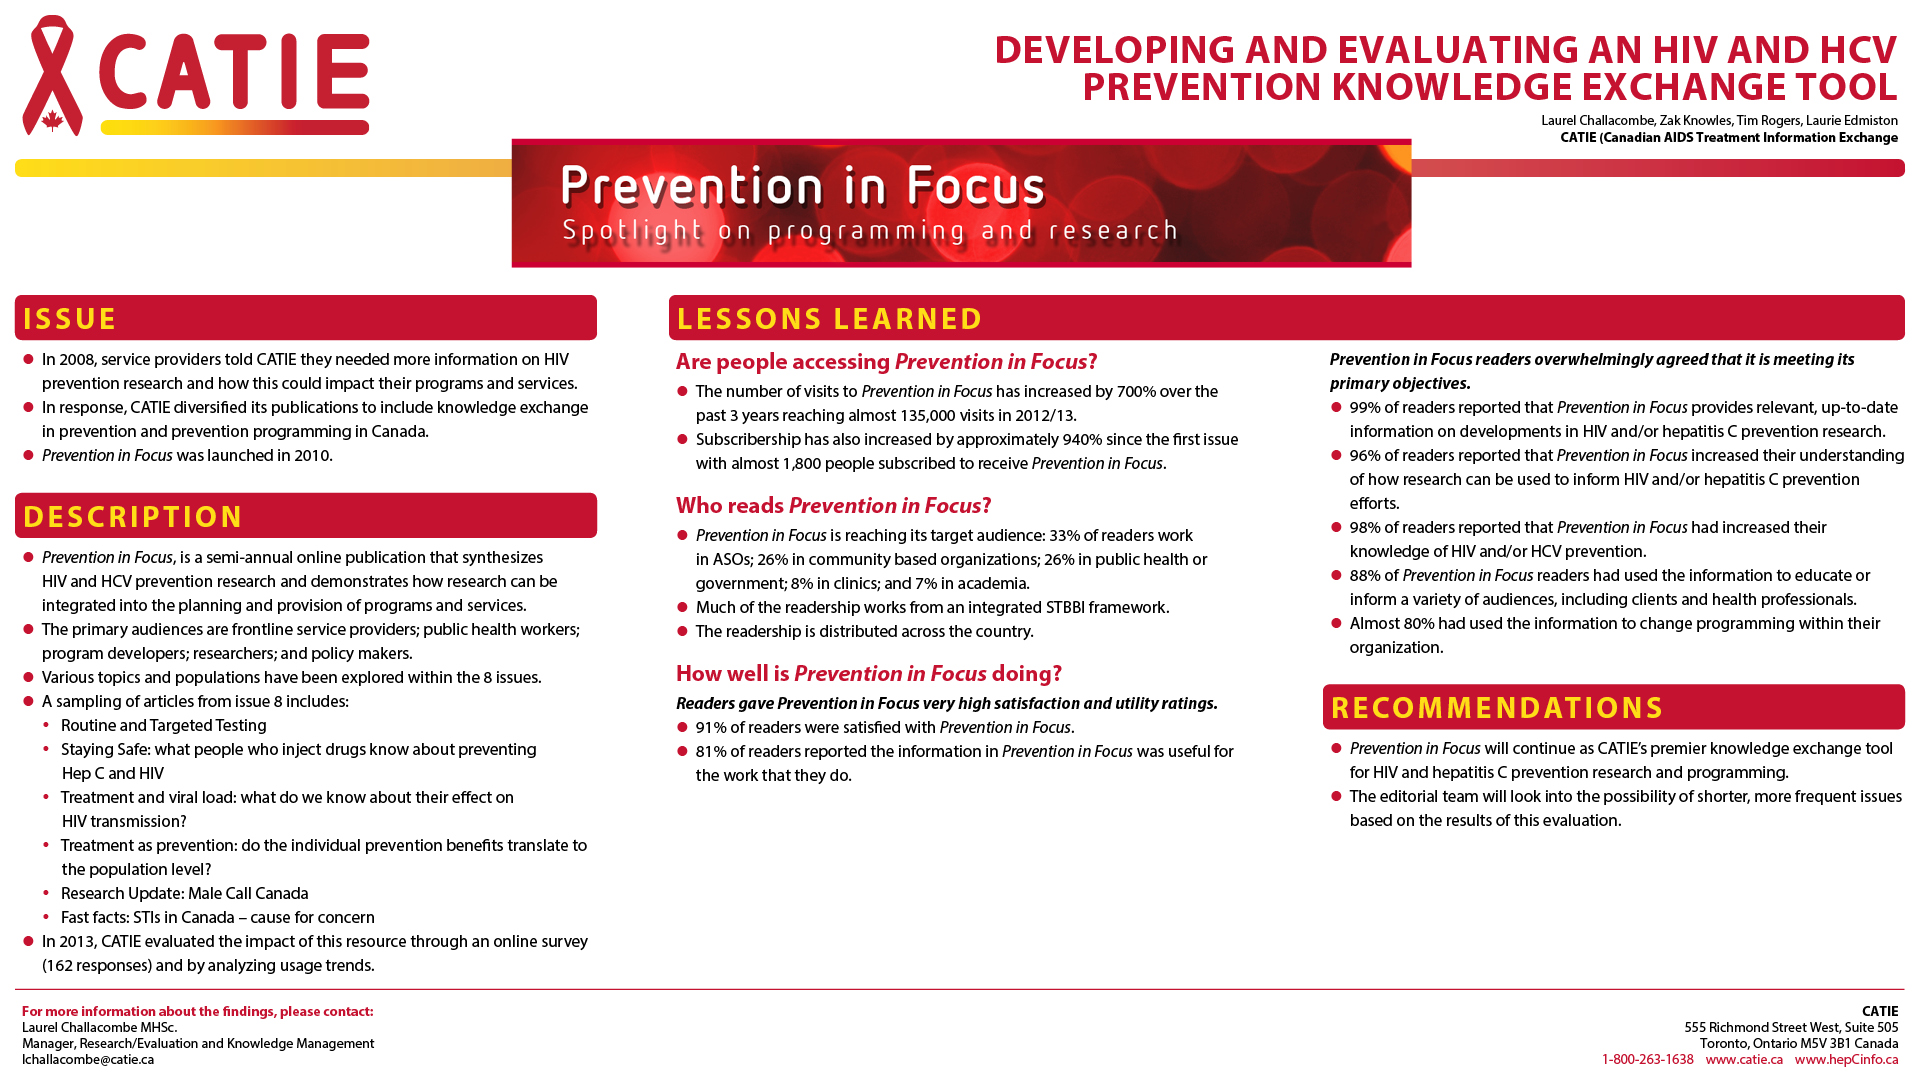 Developing and Evaluating an HIV and HCV Prevention Knowledge Exchange Tool